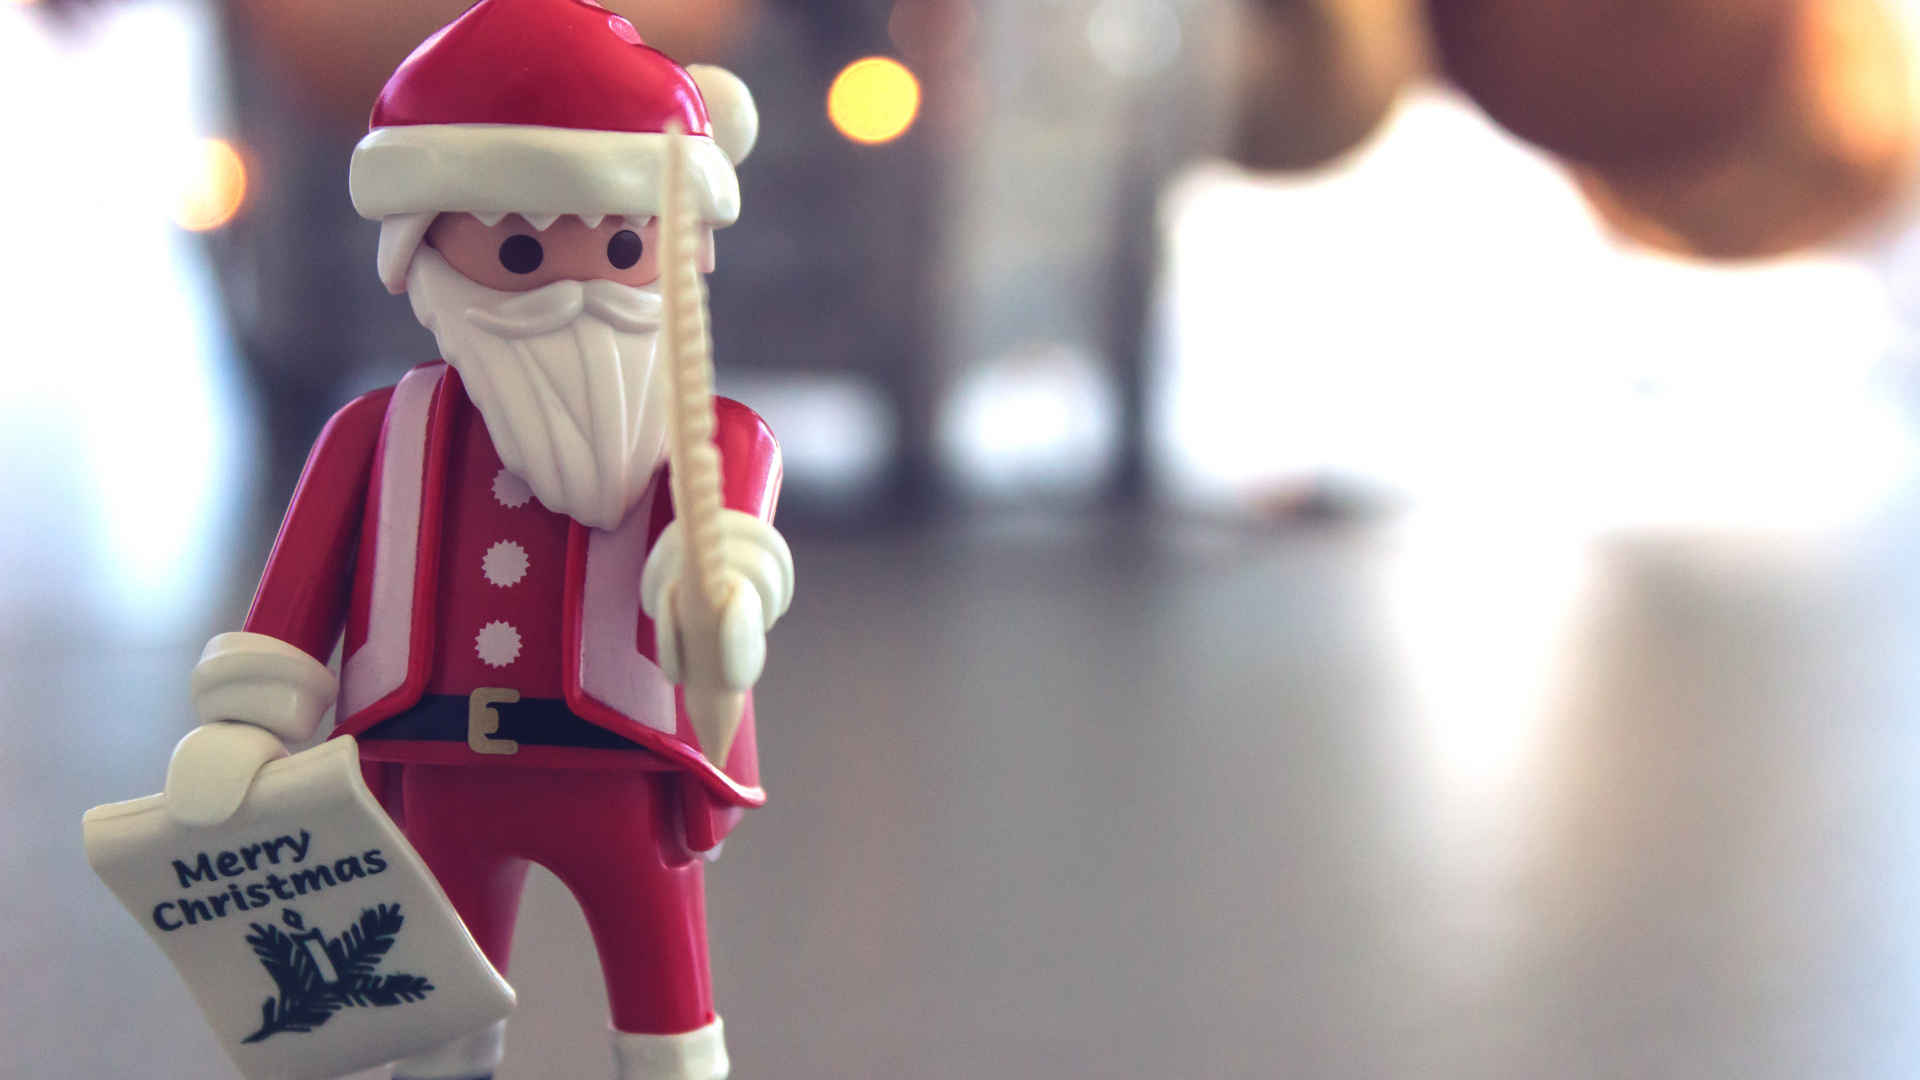 Santa Claus, Christmas Day, Figurine, Toy, Christmas. Wallpaper in 1920x1080 Resolution